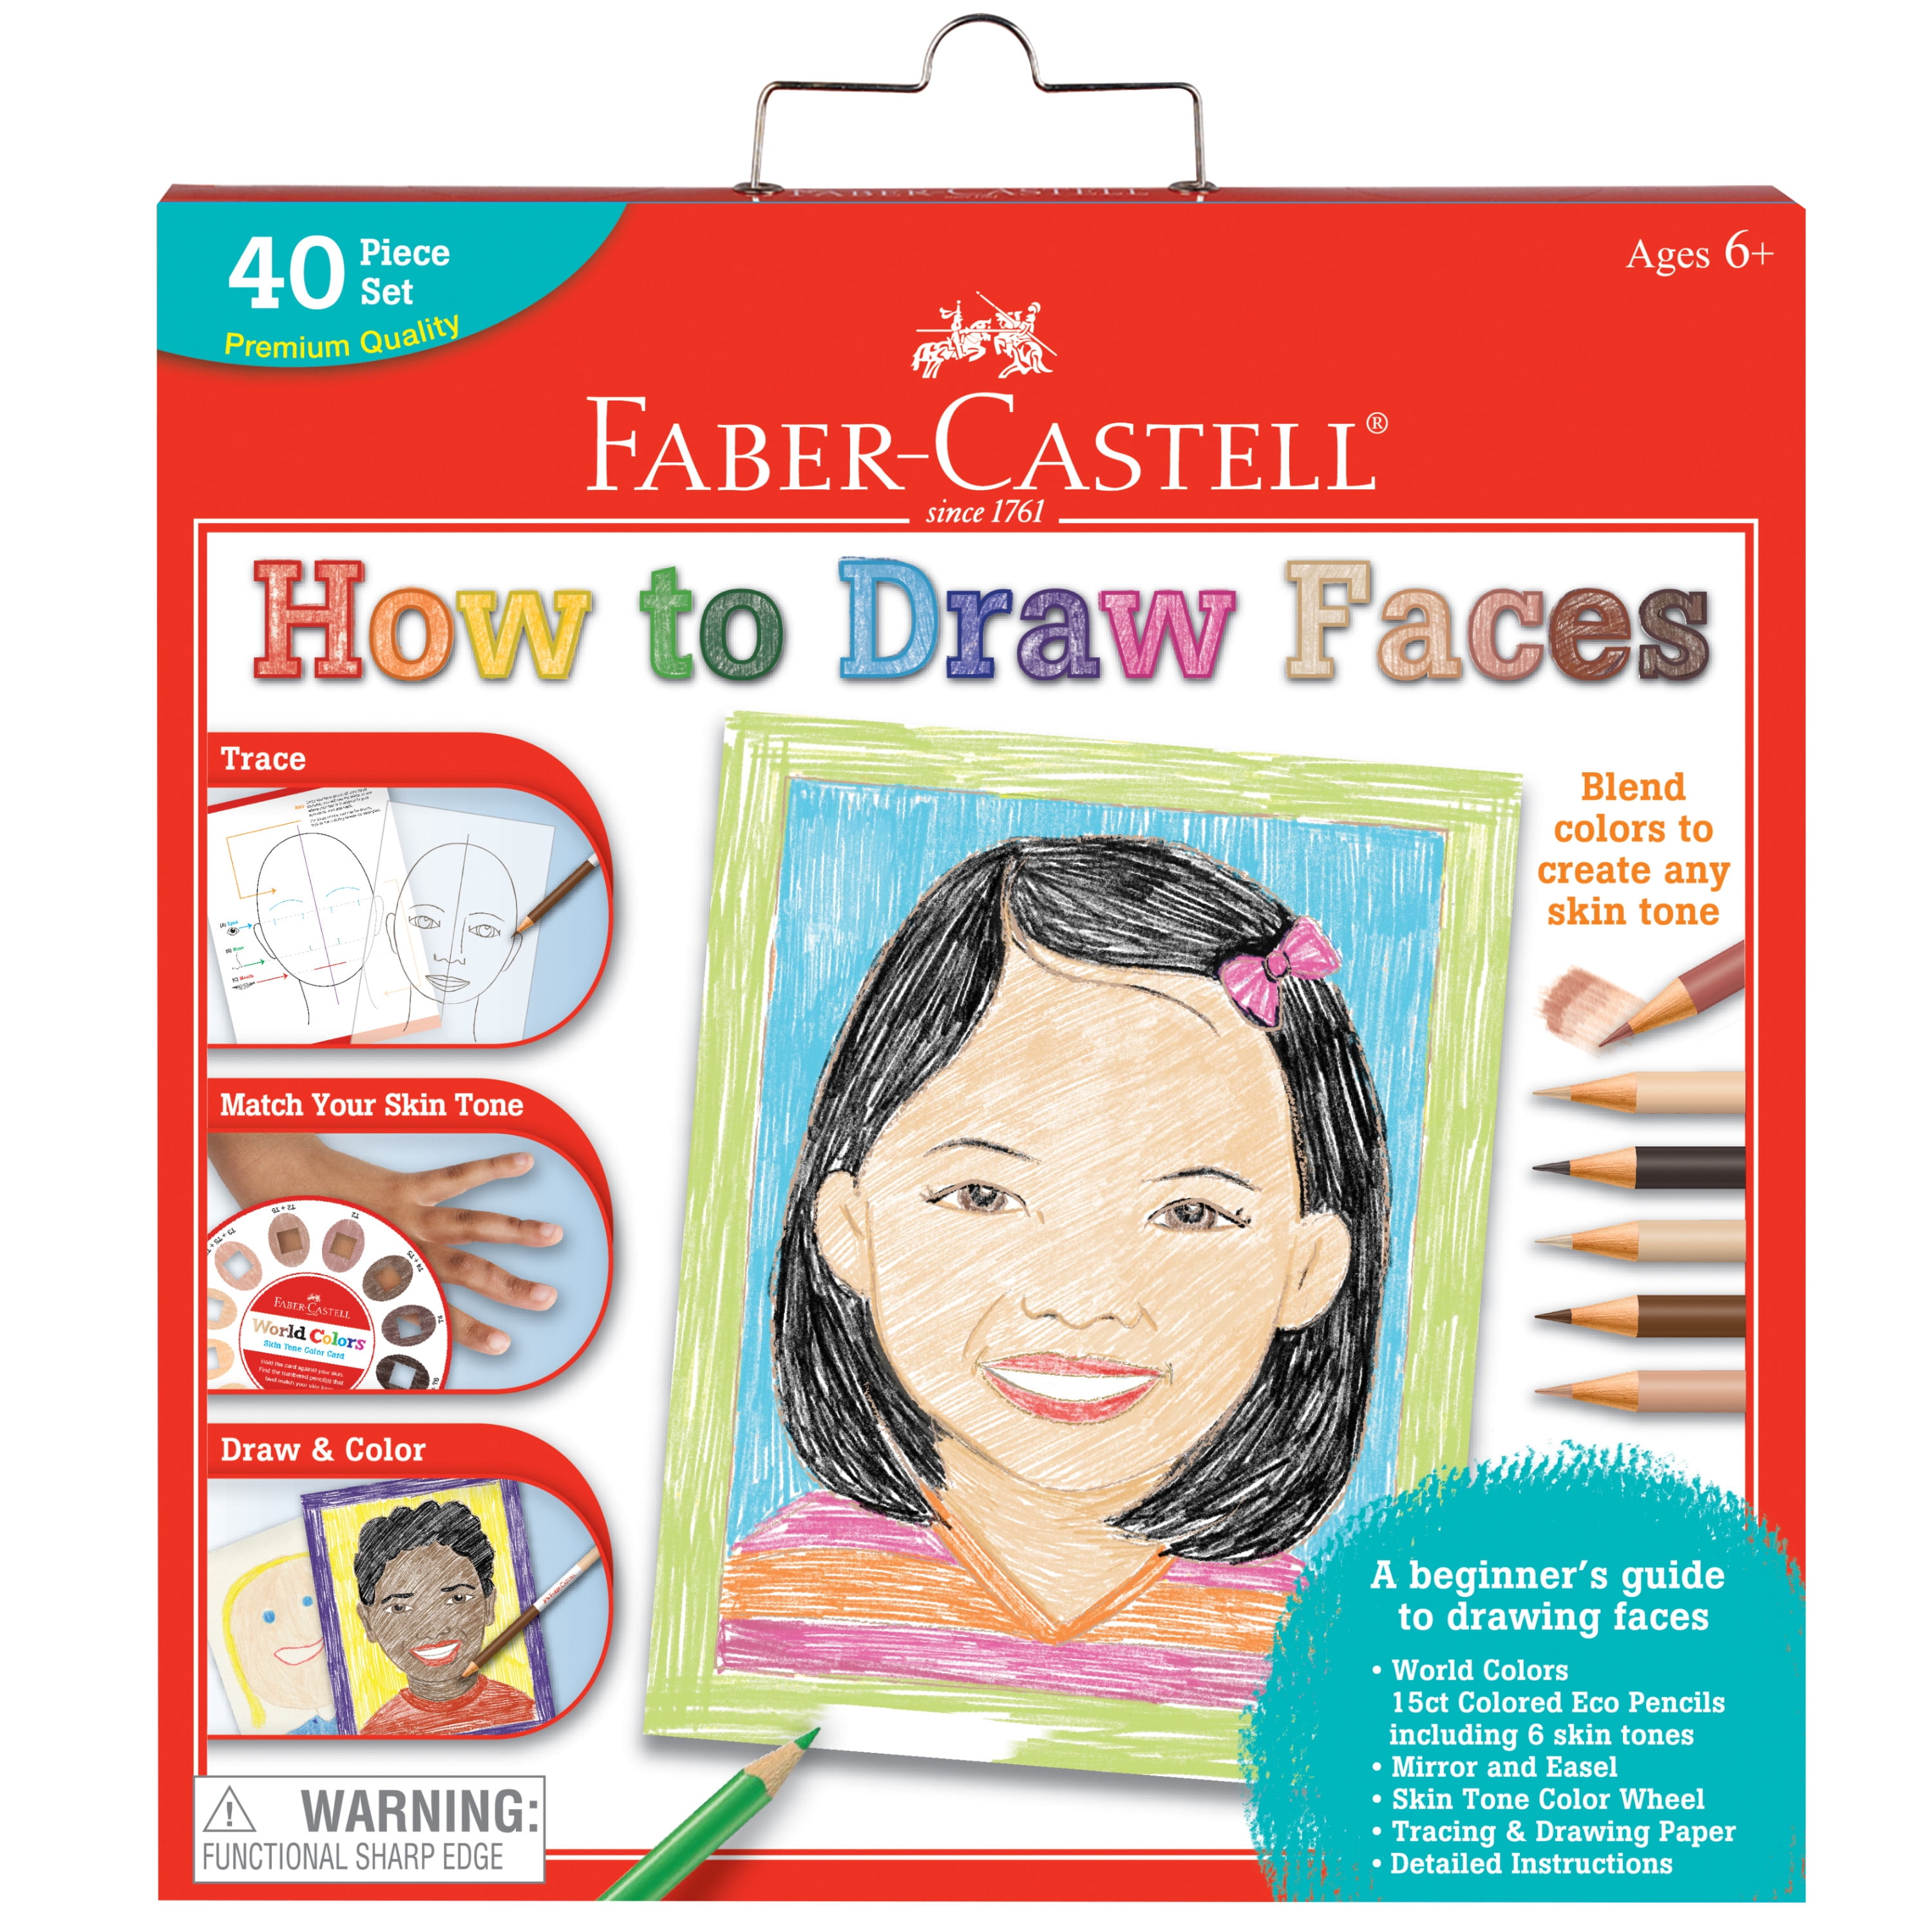 How To Draw Faces Guided Portrait Kit And World Color Eco Pencils For Kids Walmart Com Walmart Com,American Airlines Wifi Free